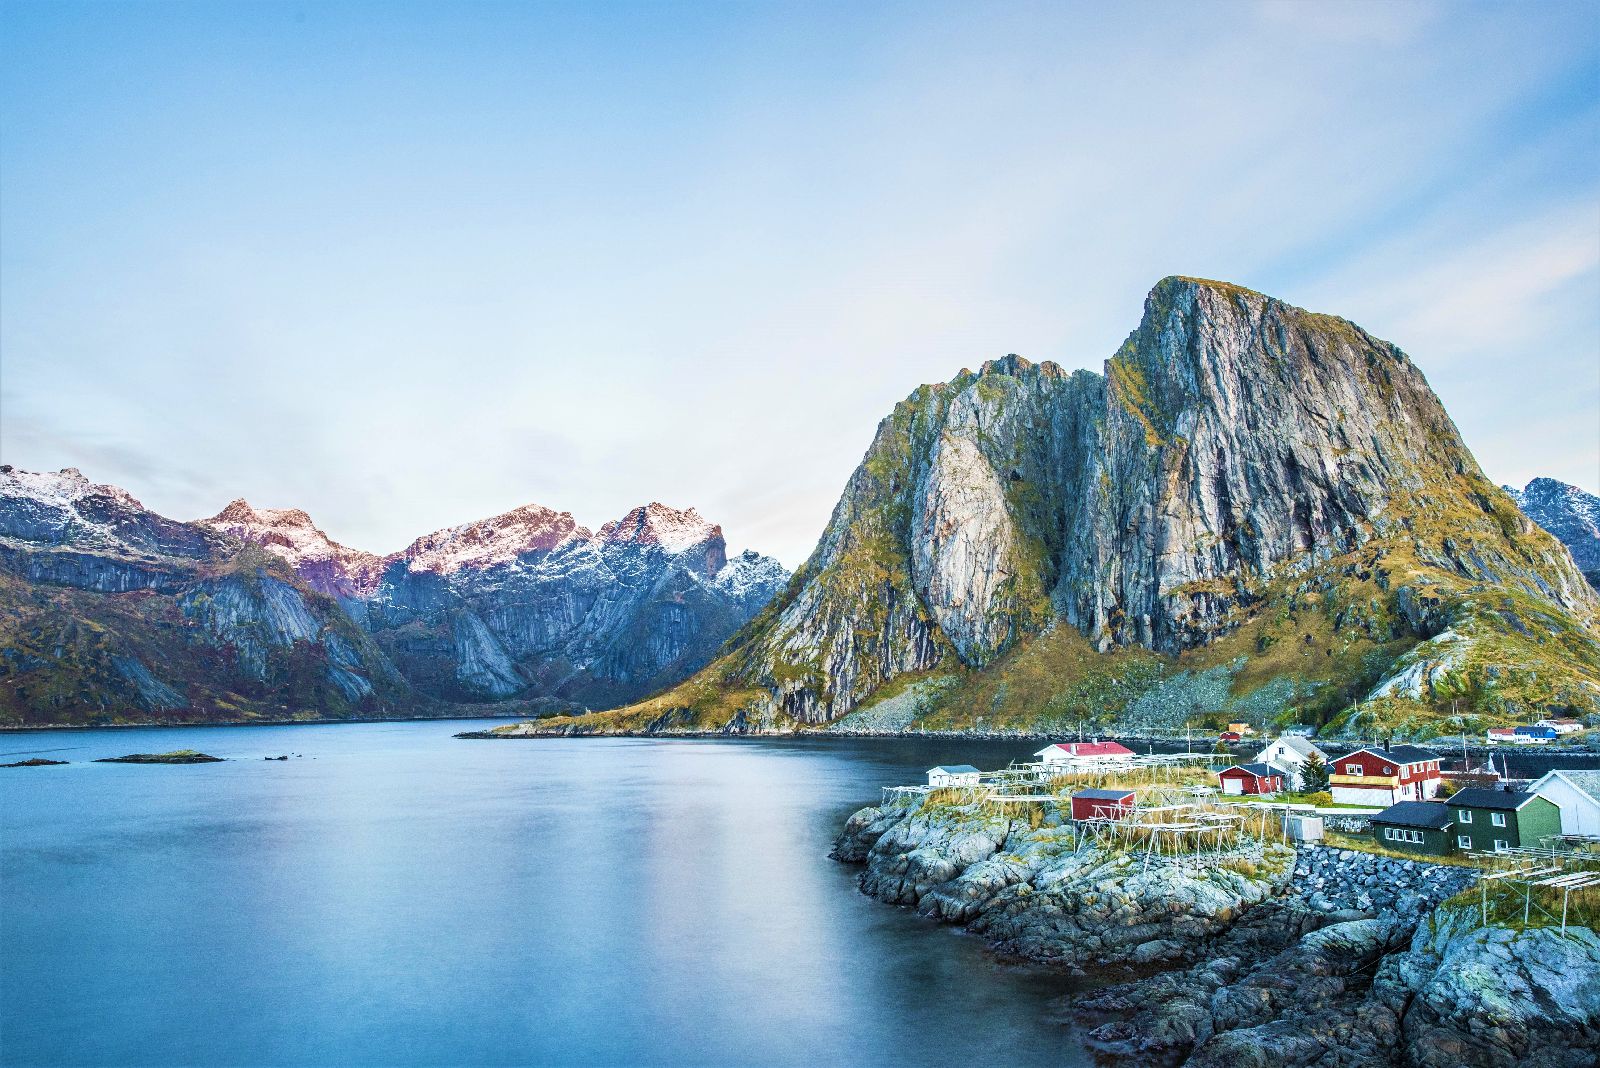 Dramatic view of small town in the shadow of a mountain in Norway's Lofoten Islands